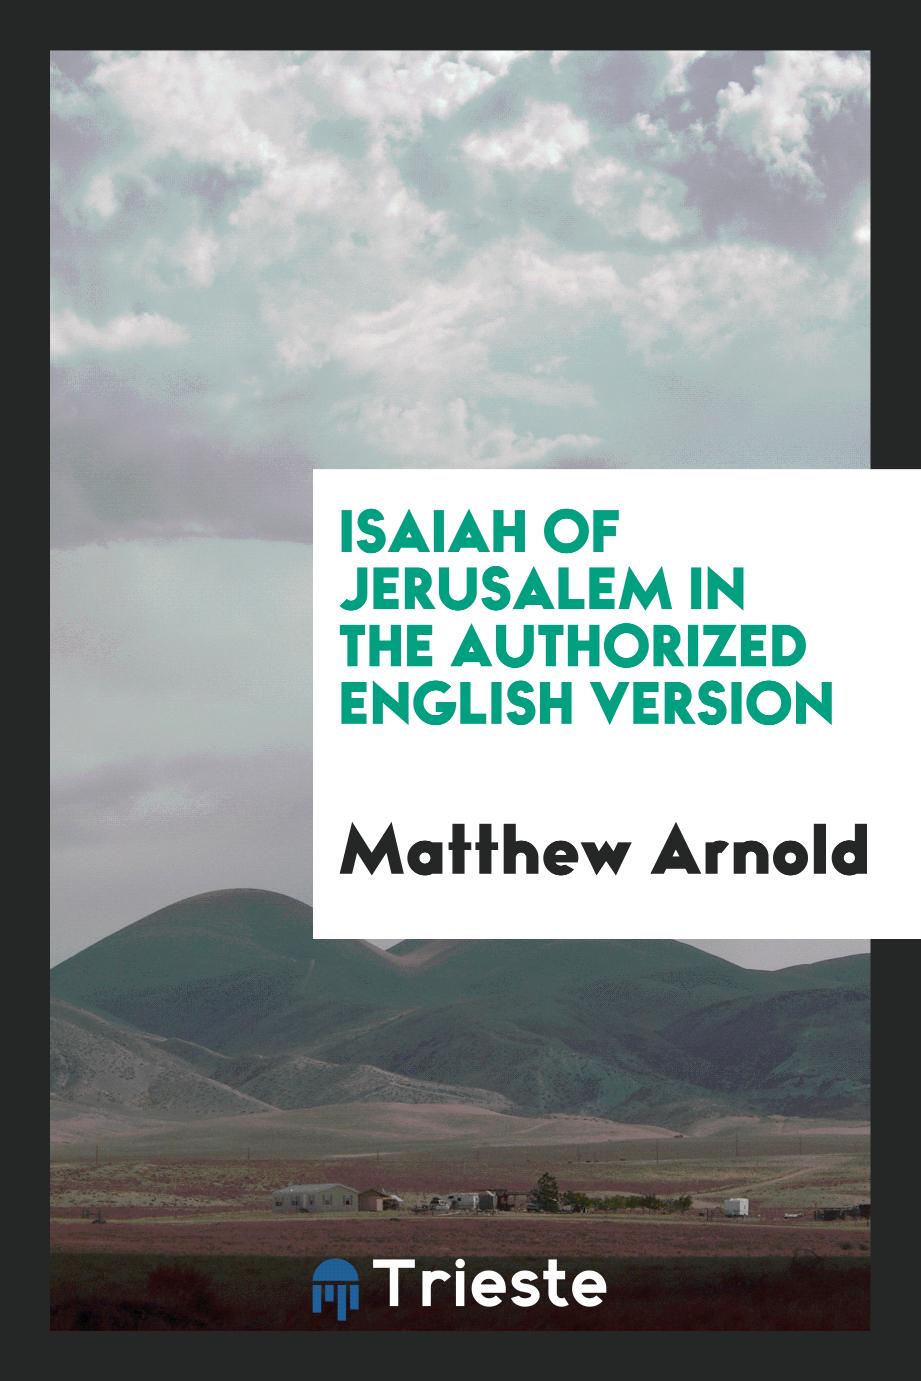 Isaiah of Jerusalem in the Authorized English Version